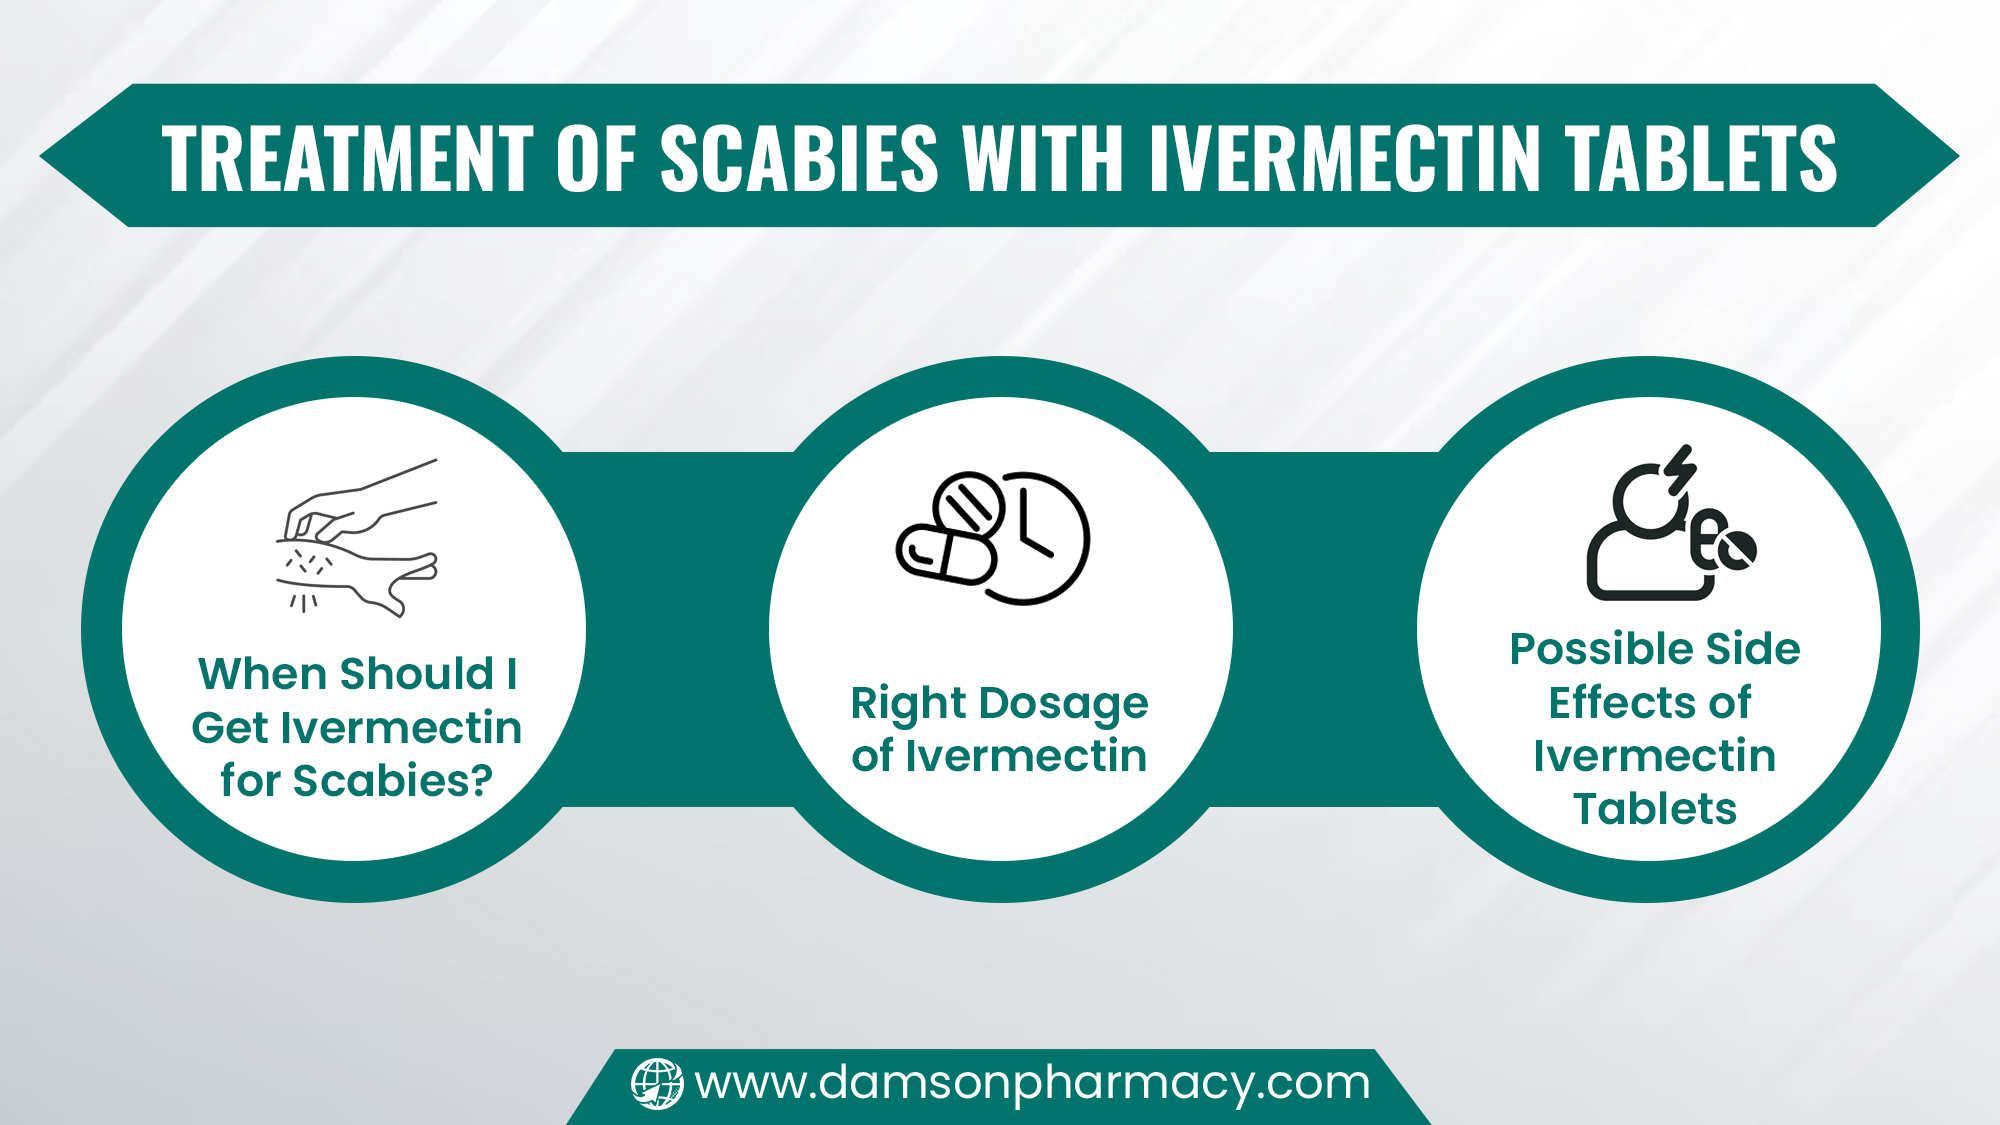 Treatment of Scabies with Ivermectin Tablets